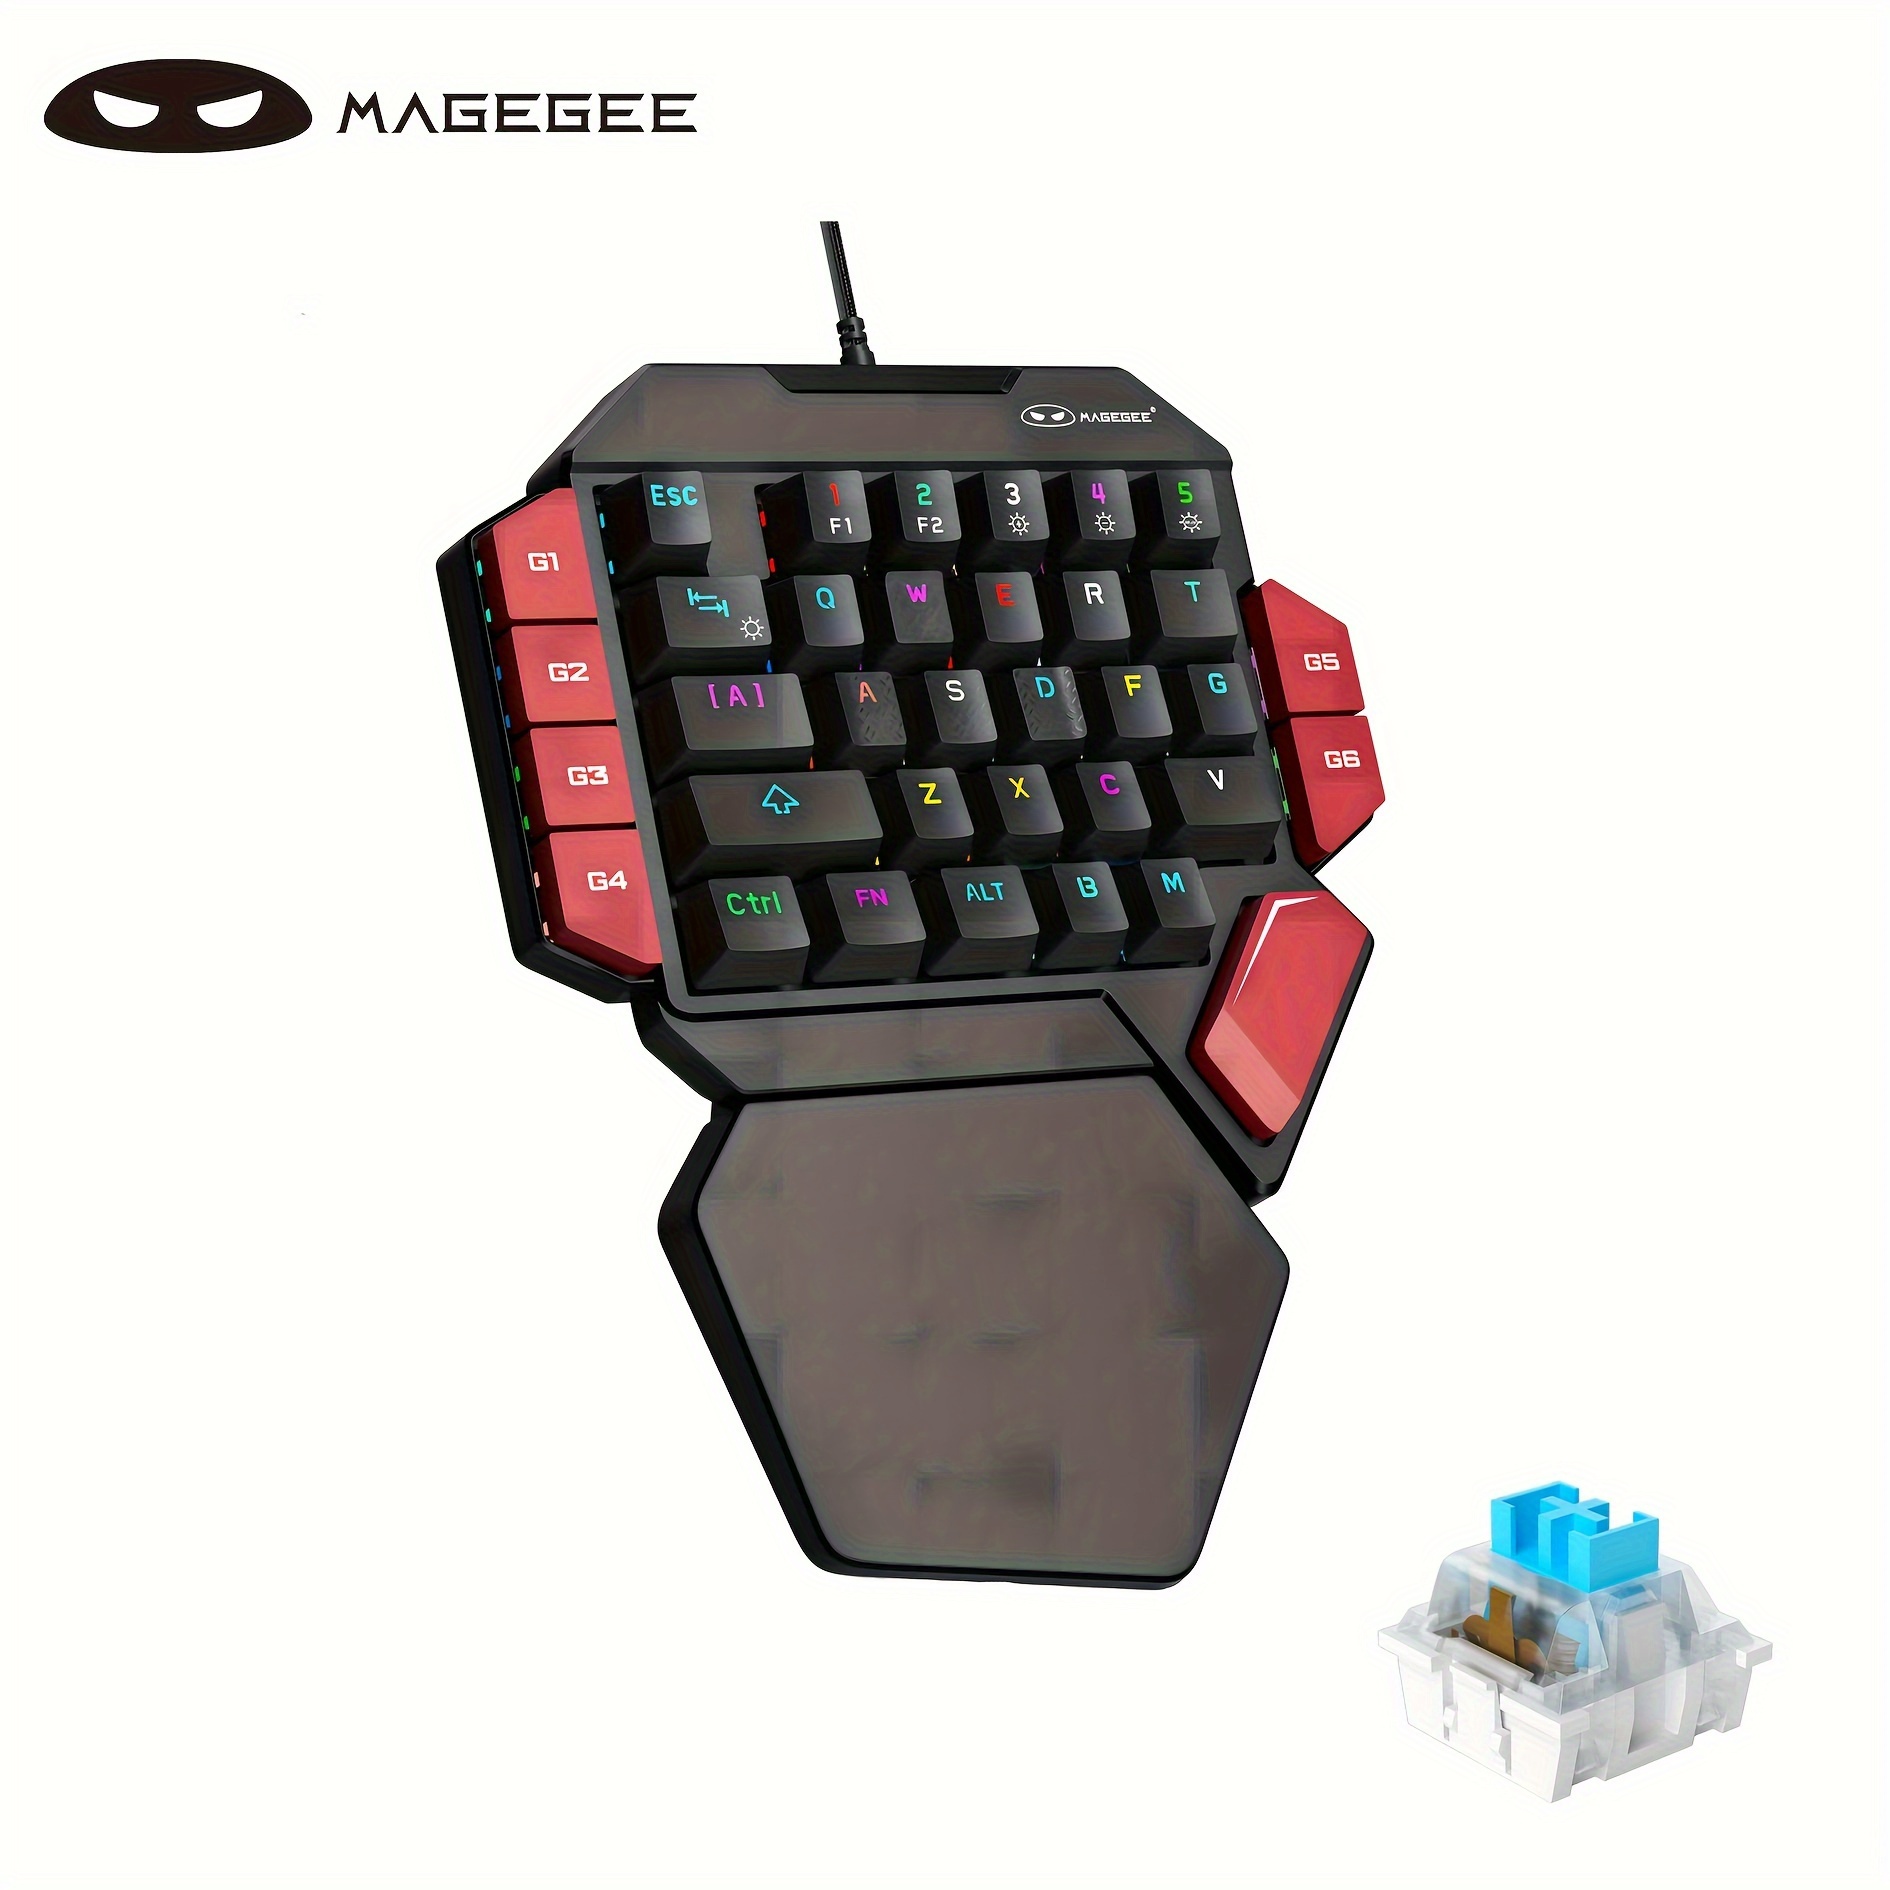 

Magegee 1 Handed Professional Gaming Keyboard, Rgb Backlit 35 Keys Mini Wired Mechanical Keyboard With Blue Switch For Pc Gamer, Support 6 Macro Keys